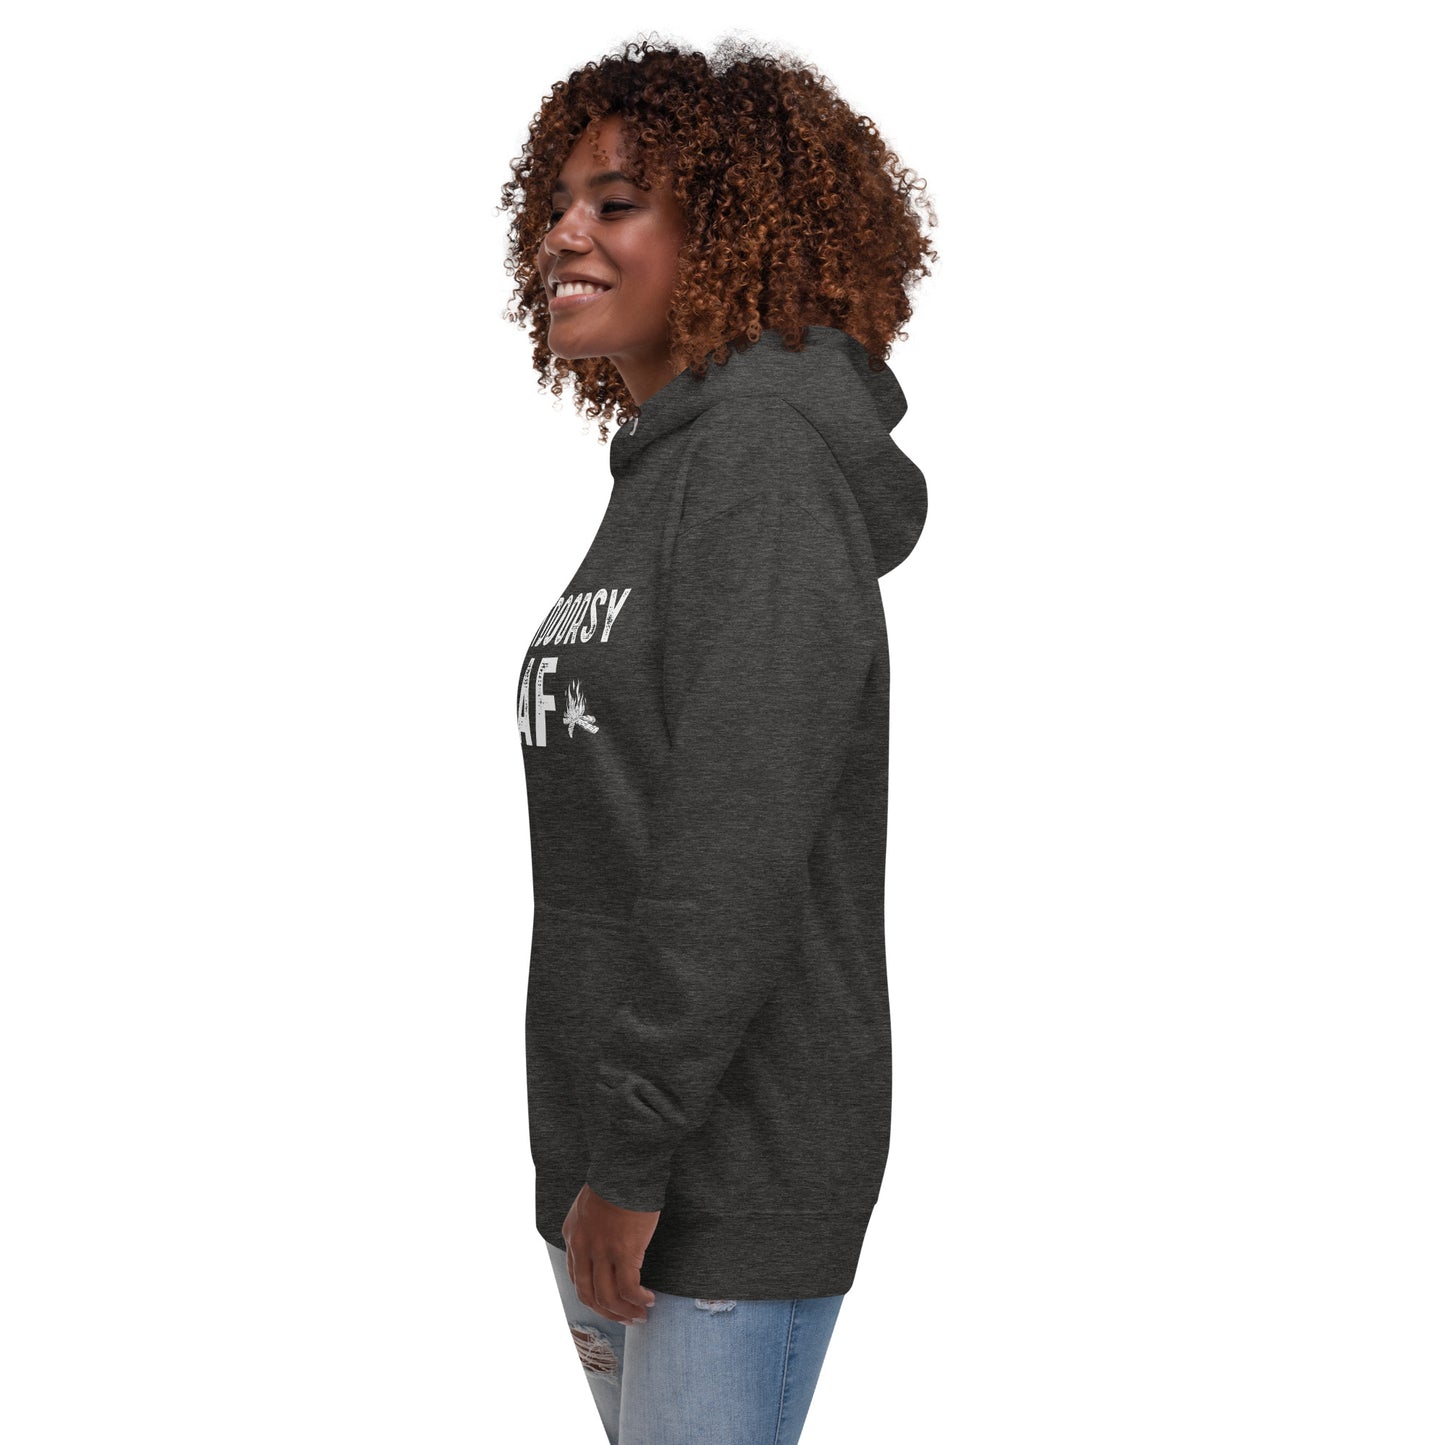 Unisex Hoodie - Outdoorsy AF New Design with Campfire Icons